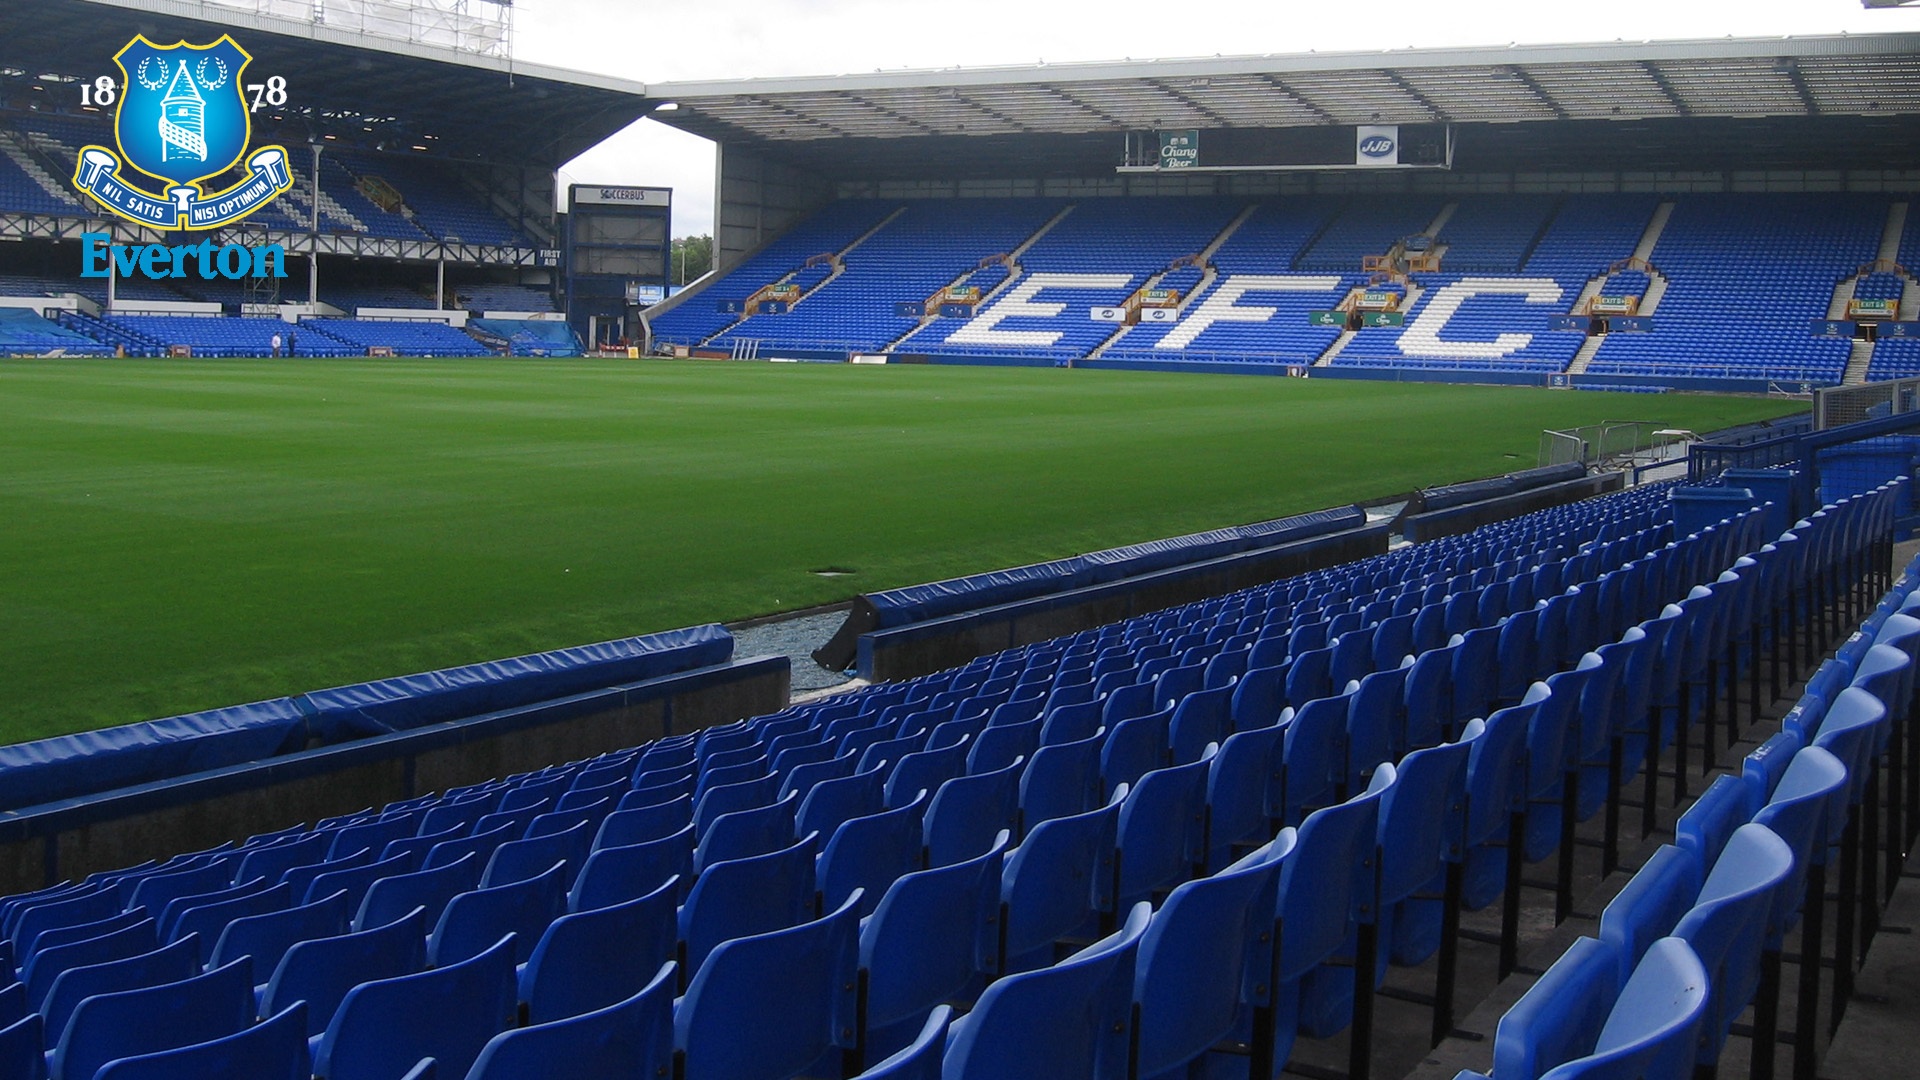 Goodison Park hosts this huge Premier League fixture on the opening weekend.